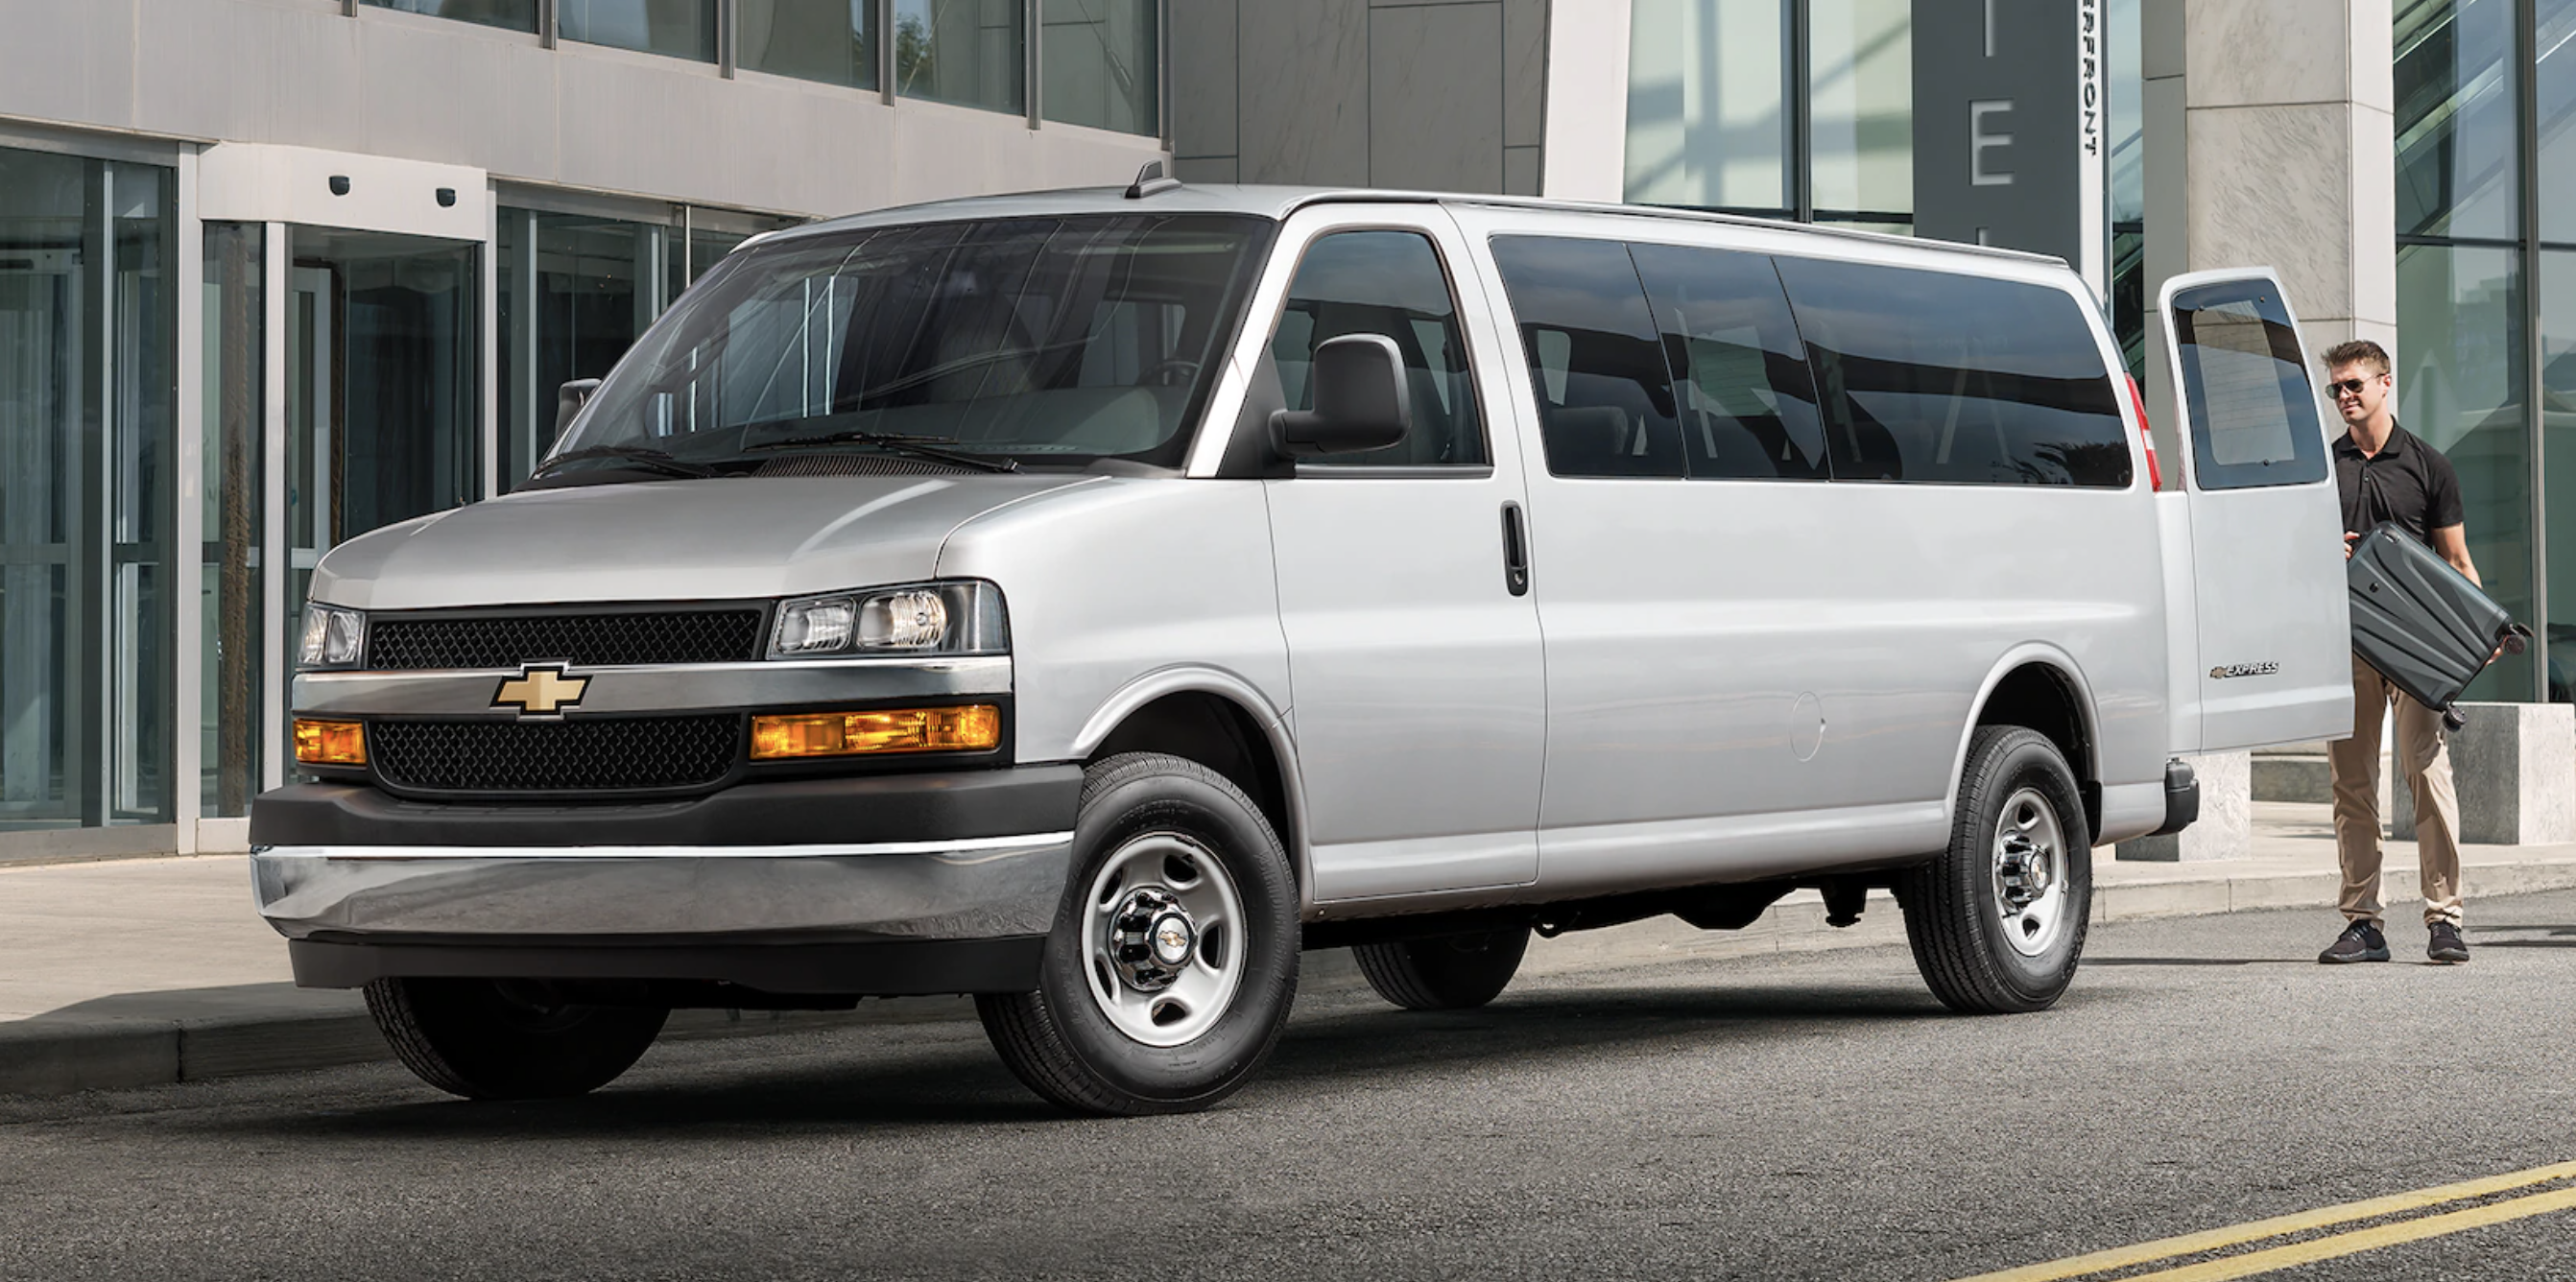 2021 Chevrolet Express Review, Pricing 